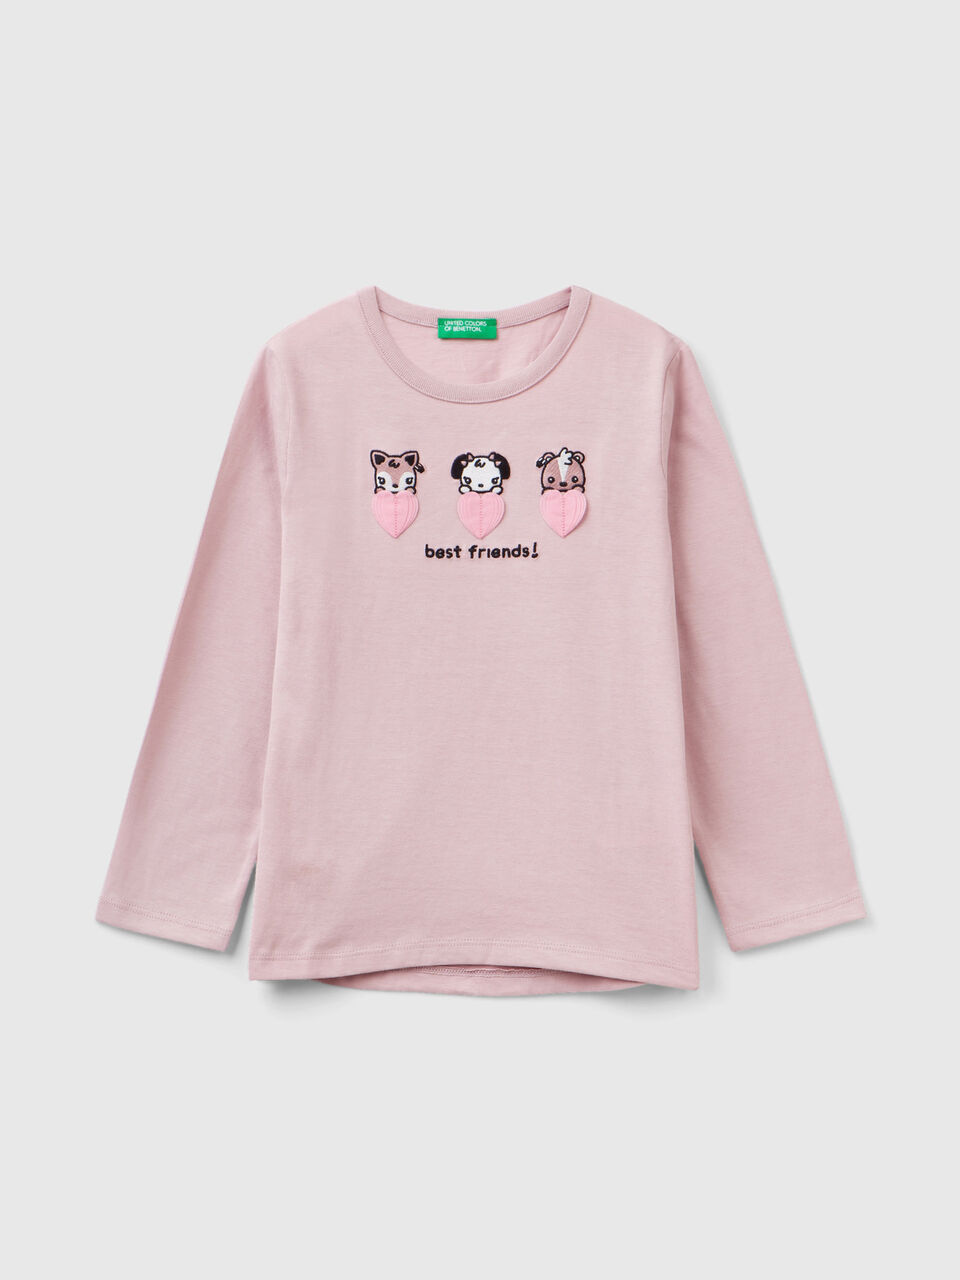 with | - embroidery and Pink Benetton T-shirt appliques